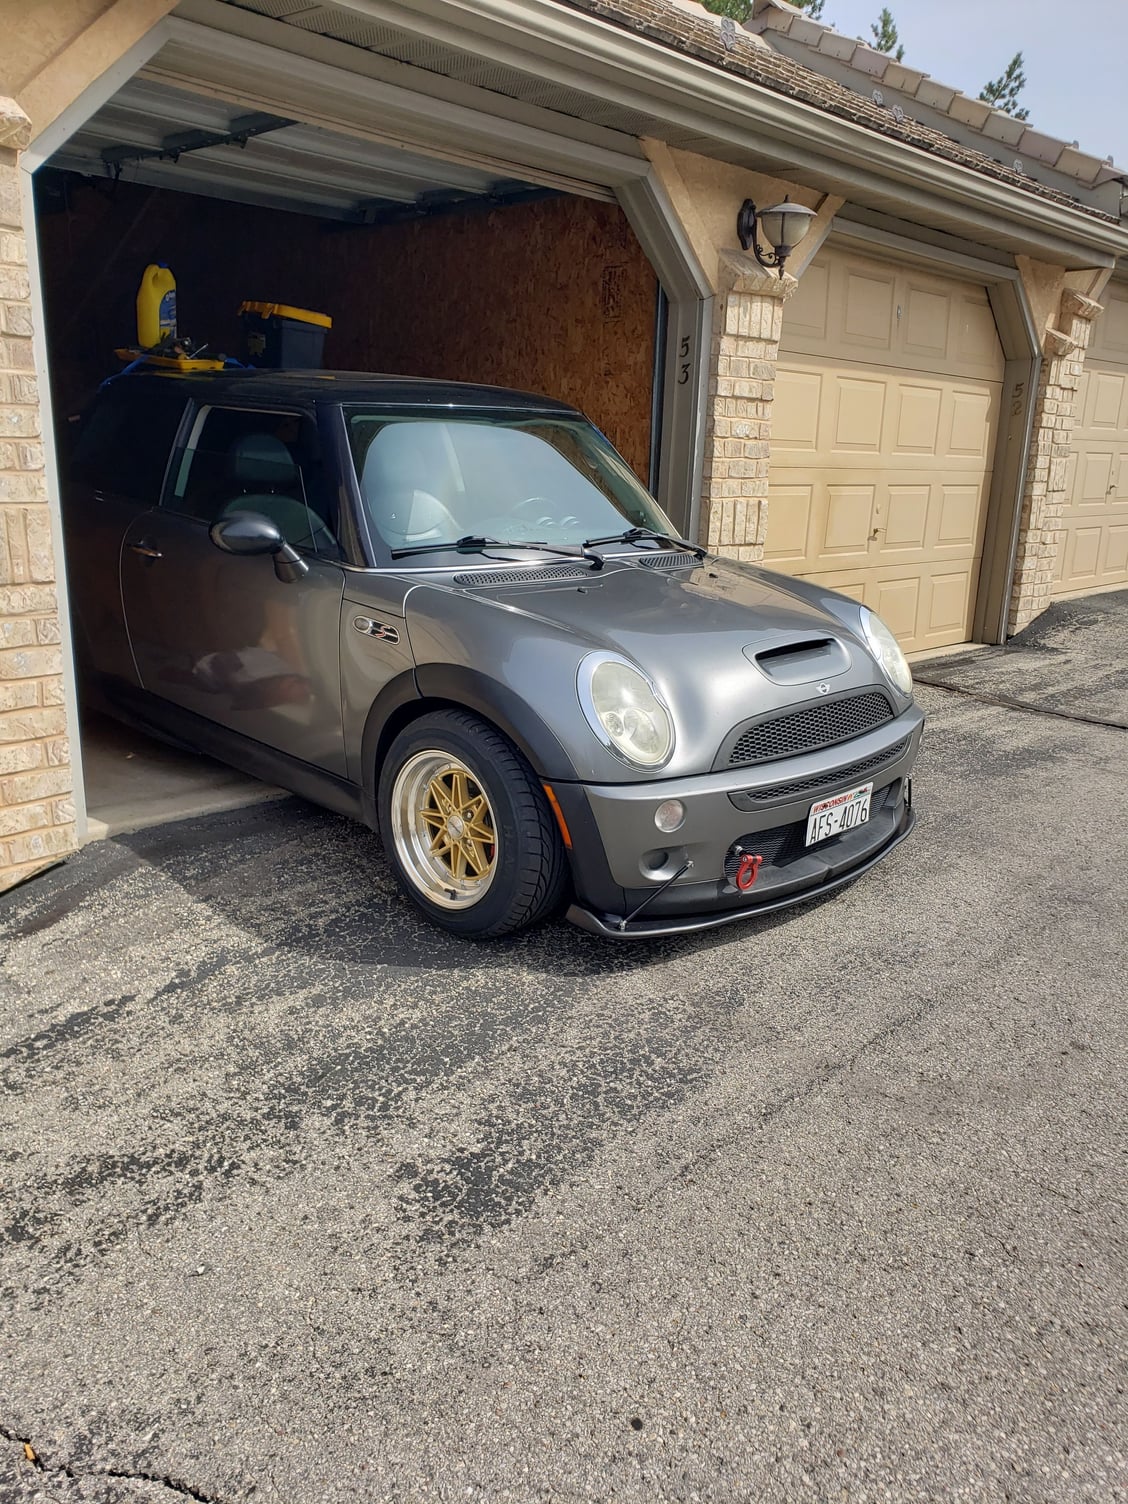 R50/R53 Project rice - North American Motoring